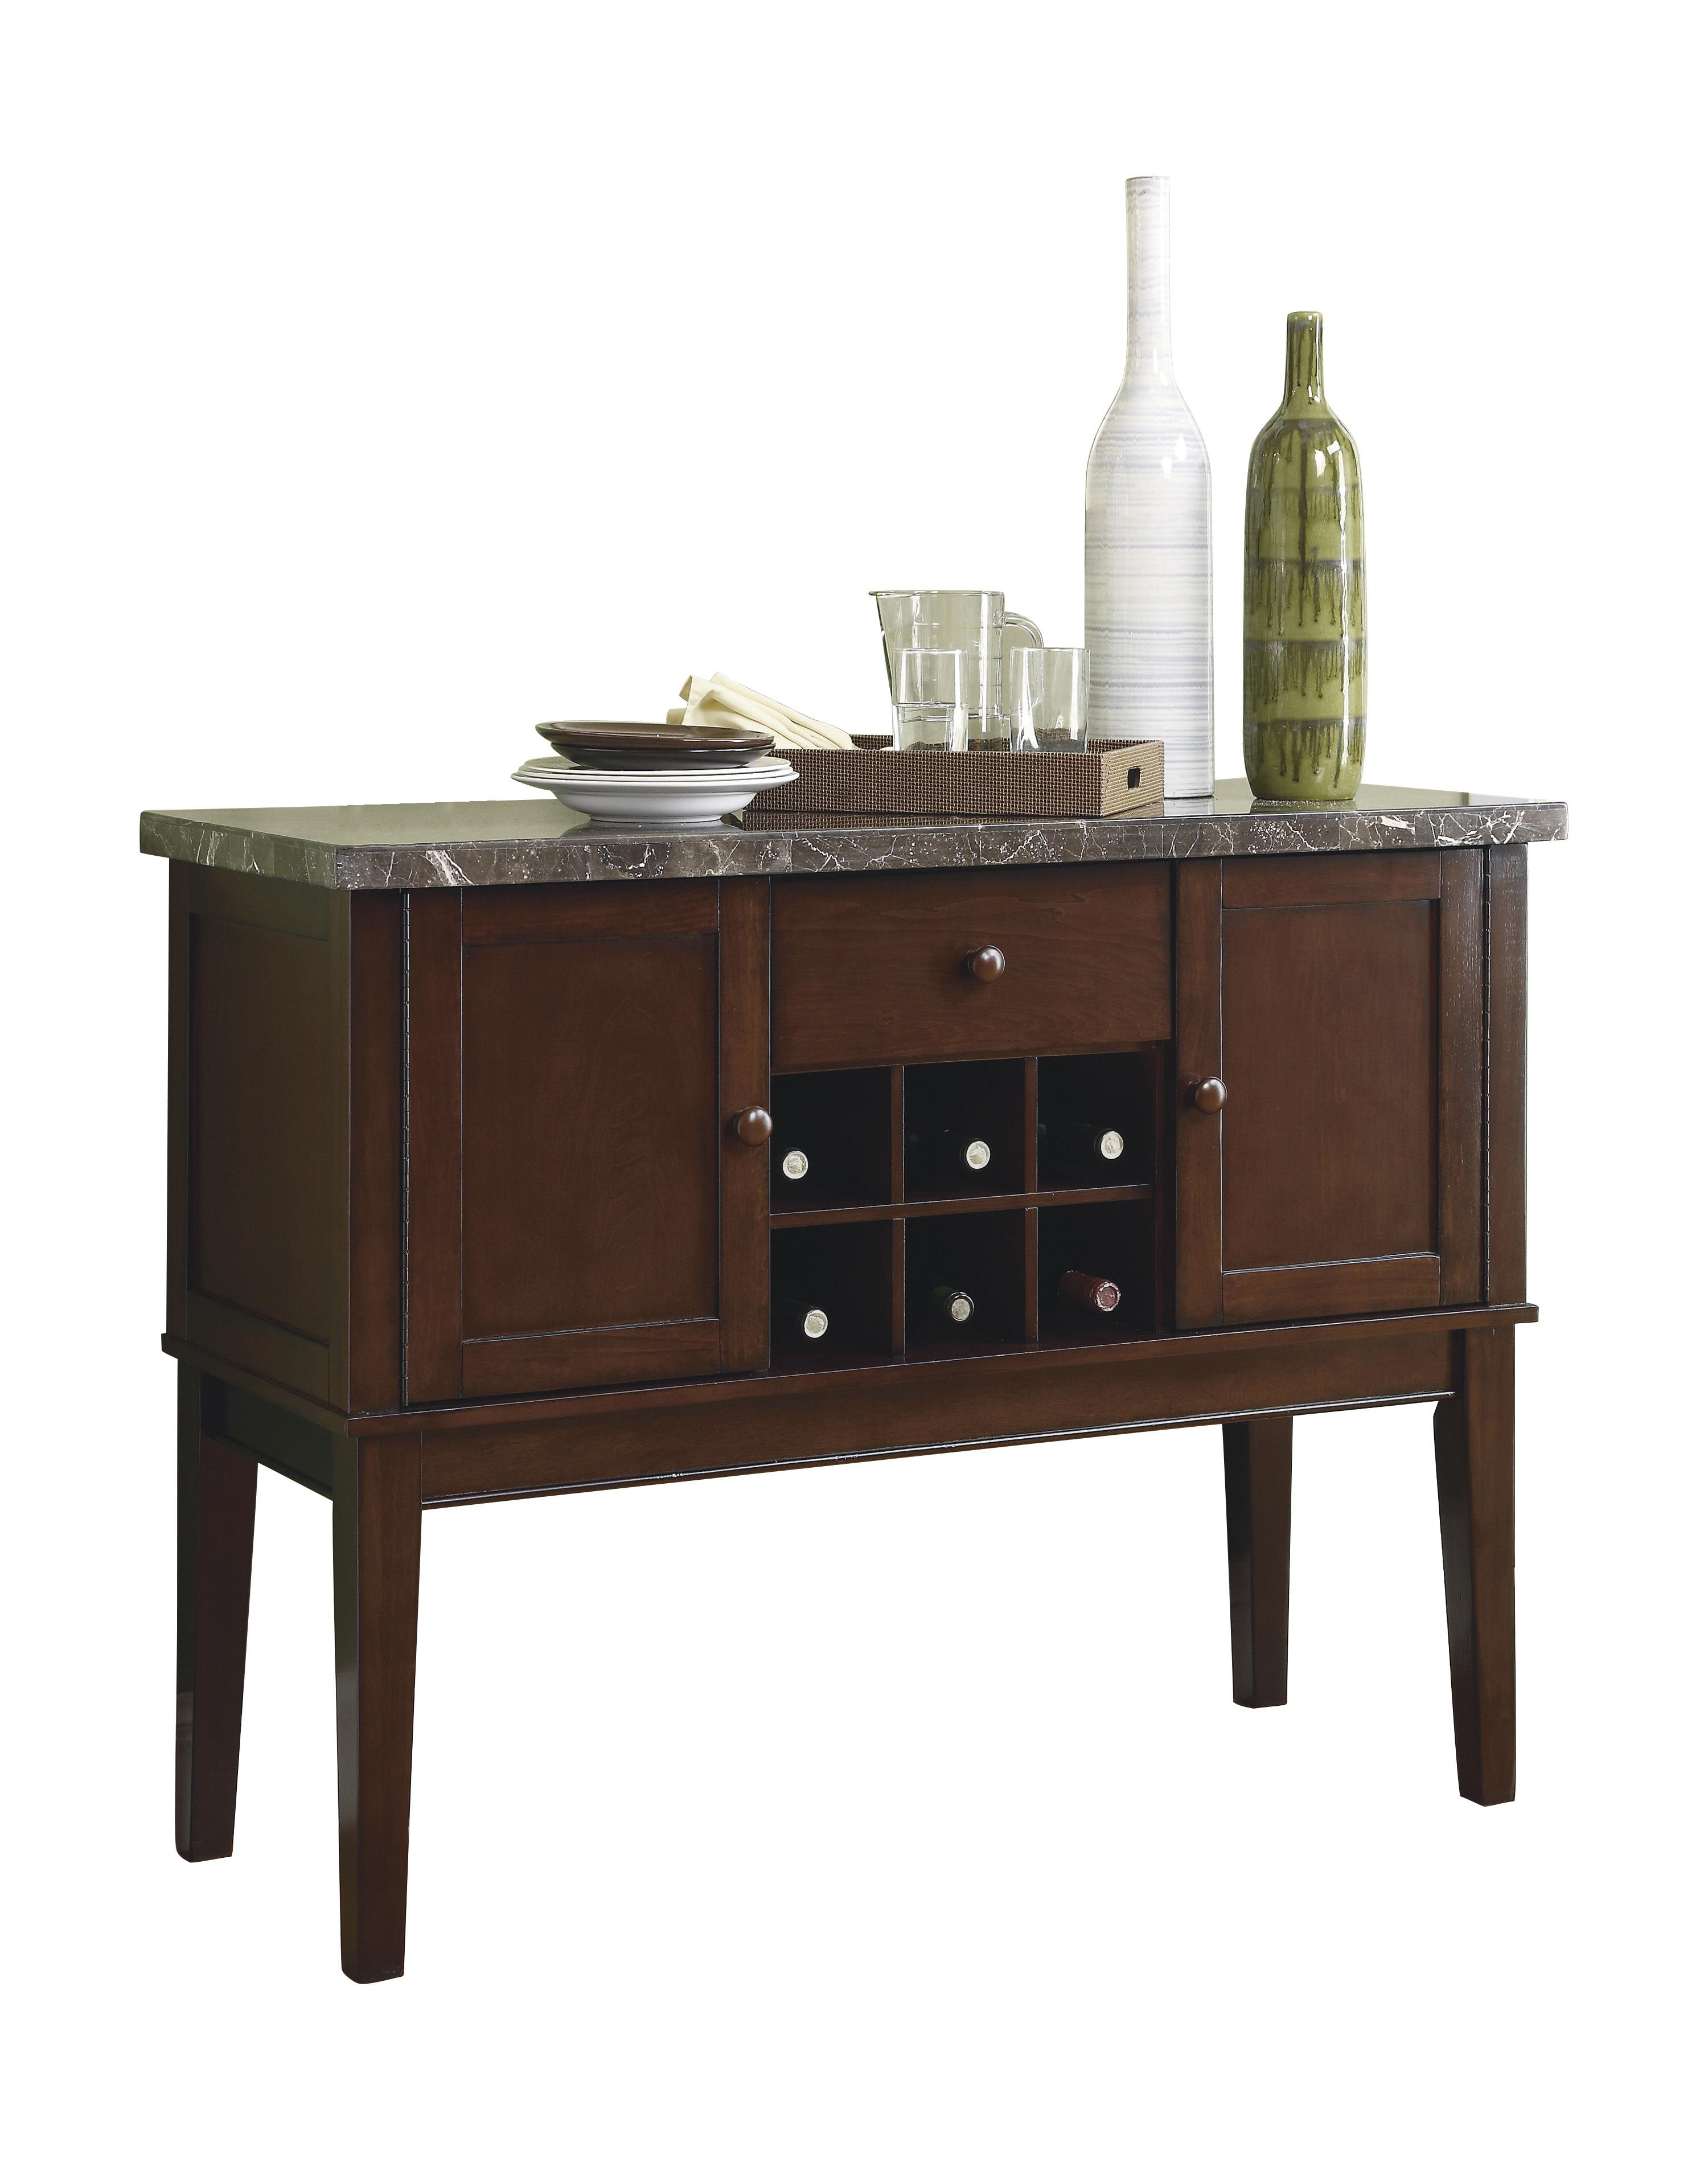 Transitional Server Decatur Collection Server 2456-40-S 2456-40-S in Dark Cherry 